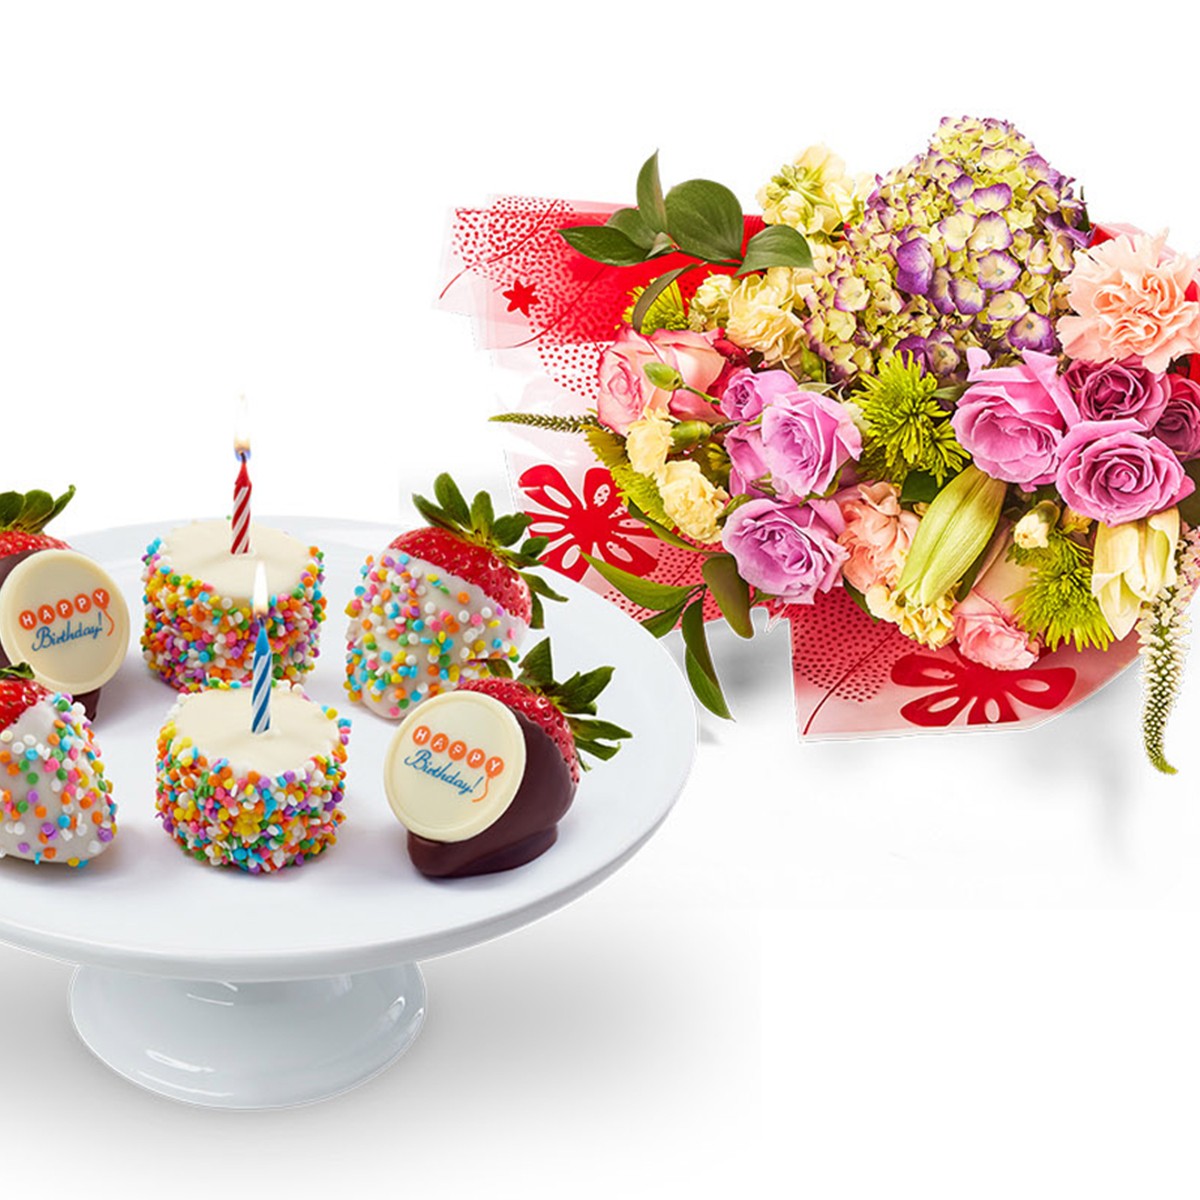 Vanilla Edible Cake with Confetti - One Size by Edible Arrangements